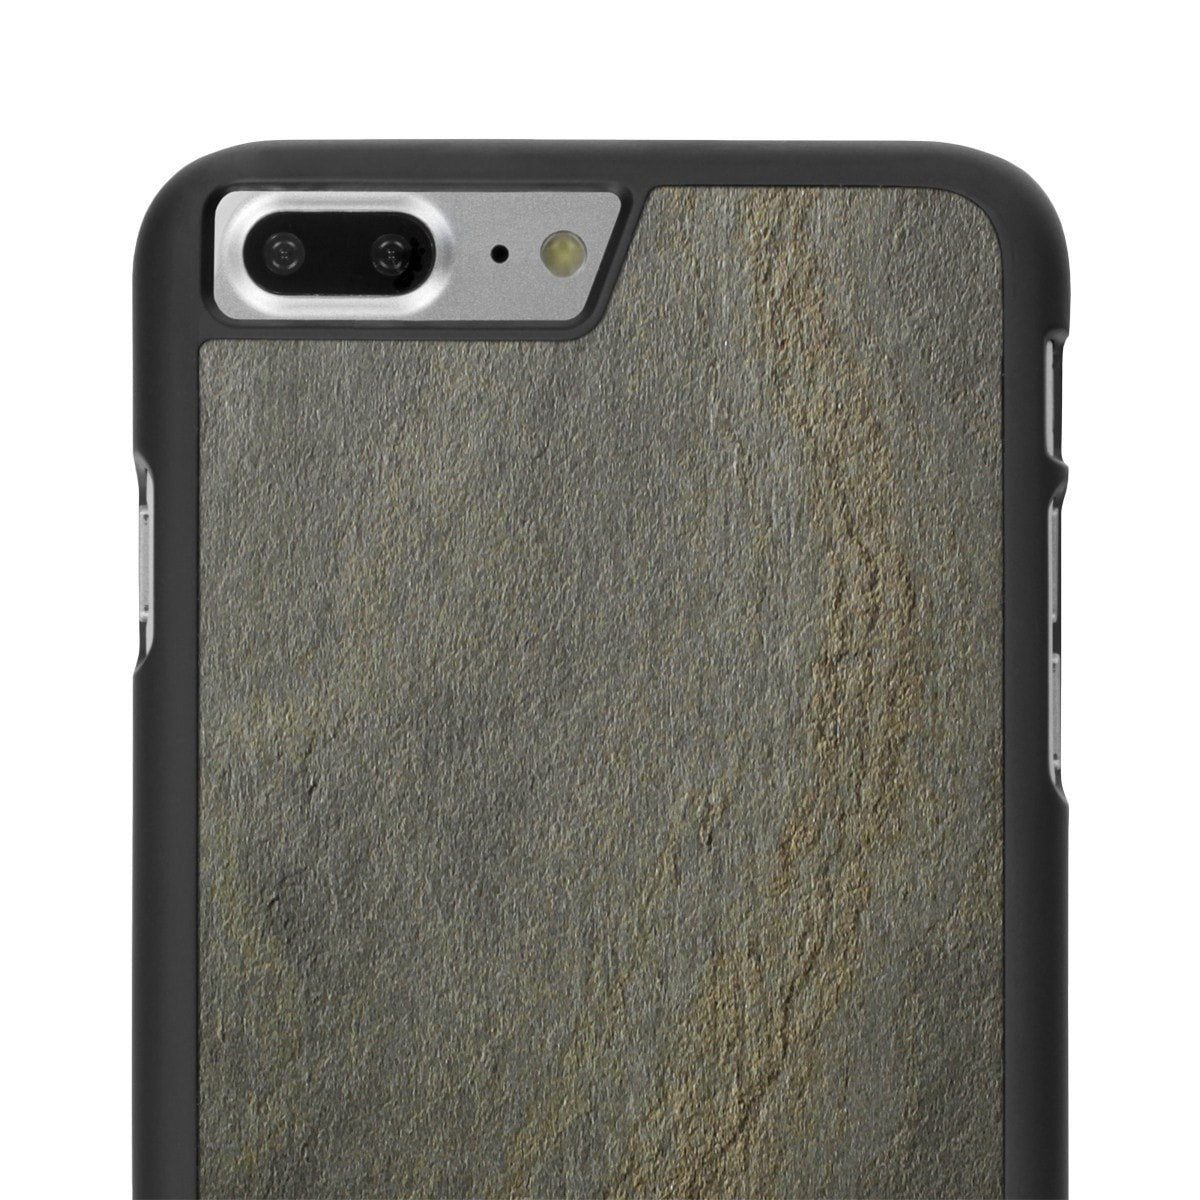  iPhone 8 Plus —  Stone Snap Case - Cover-Up - 6